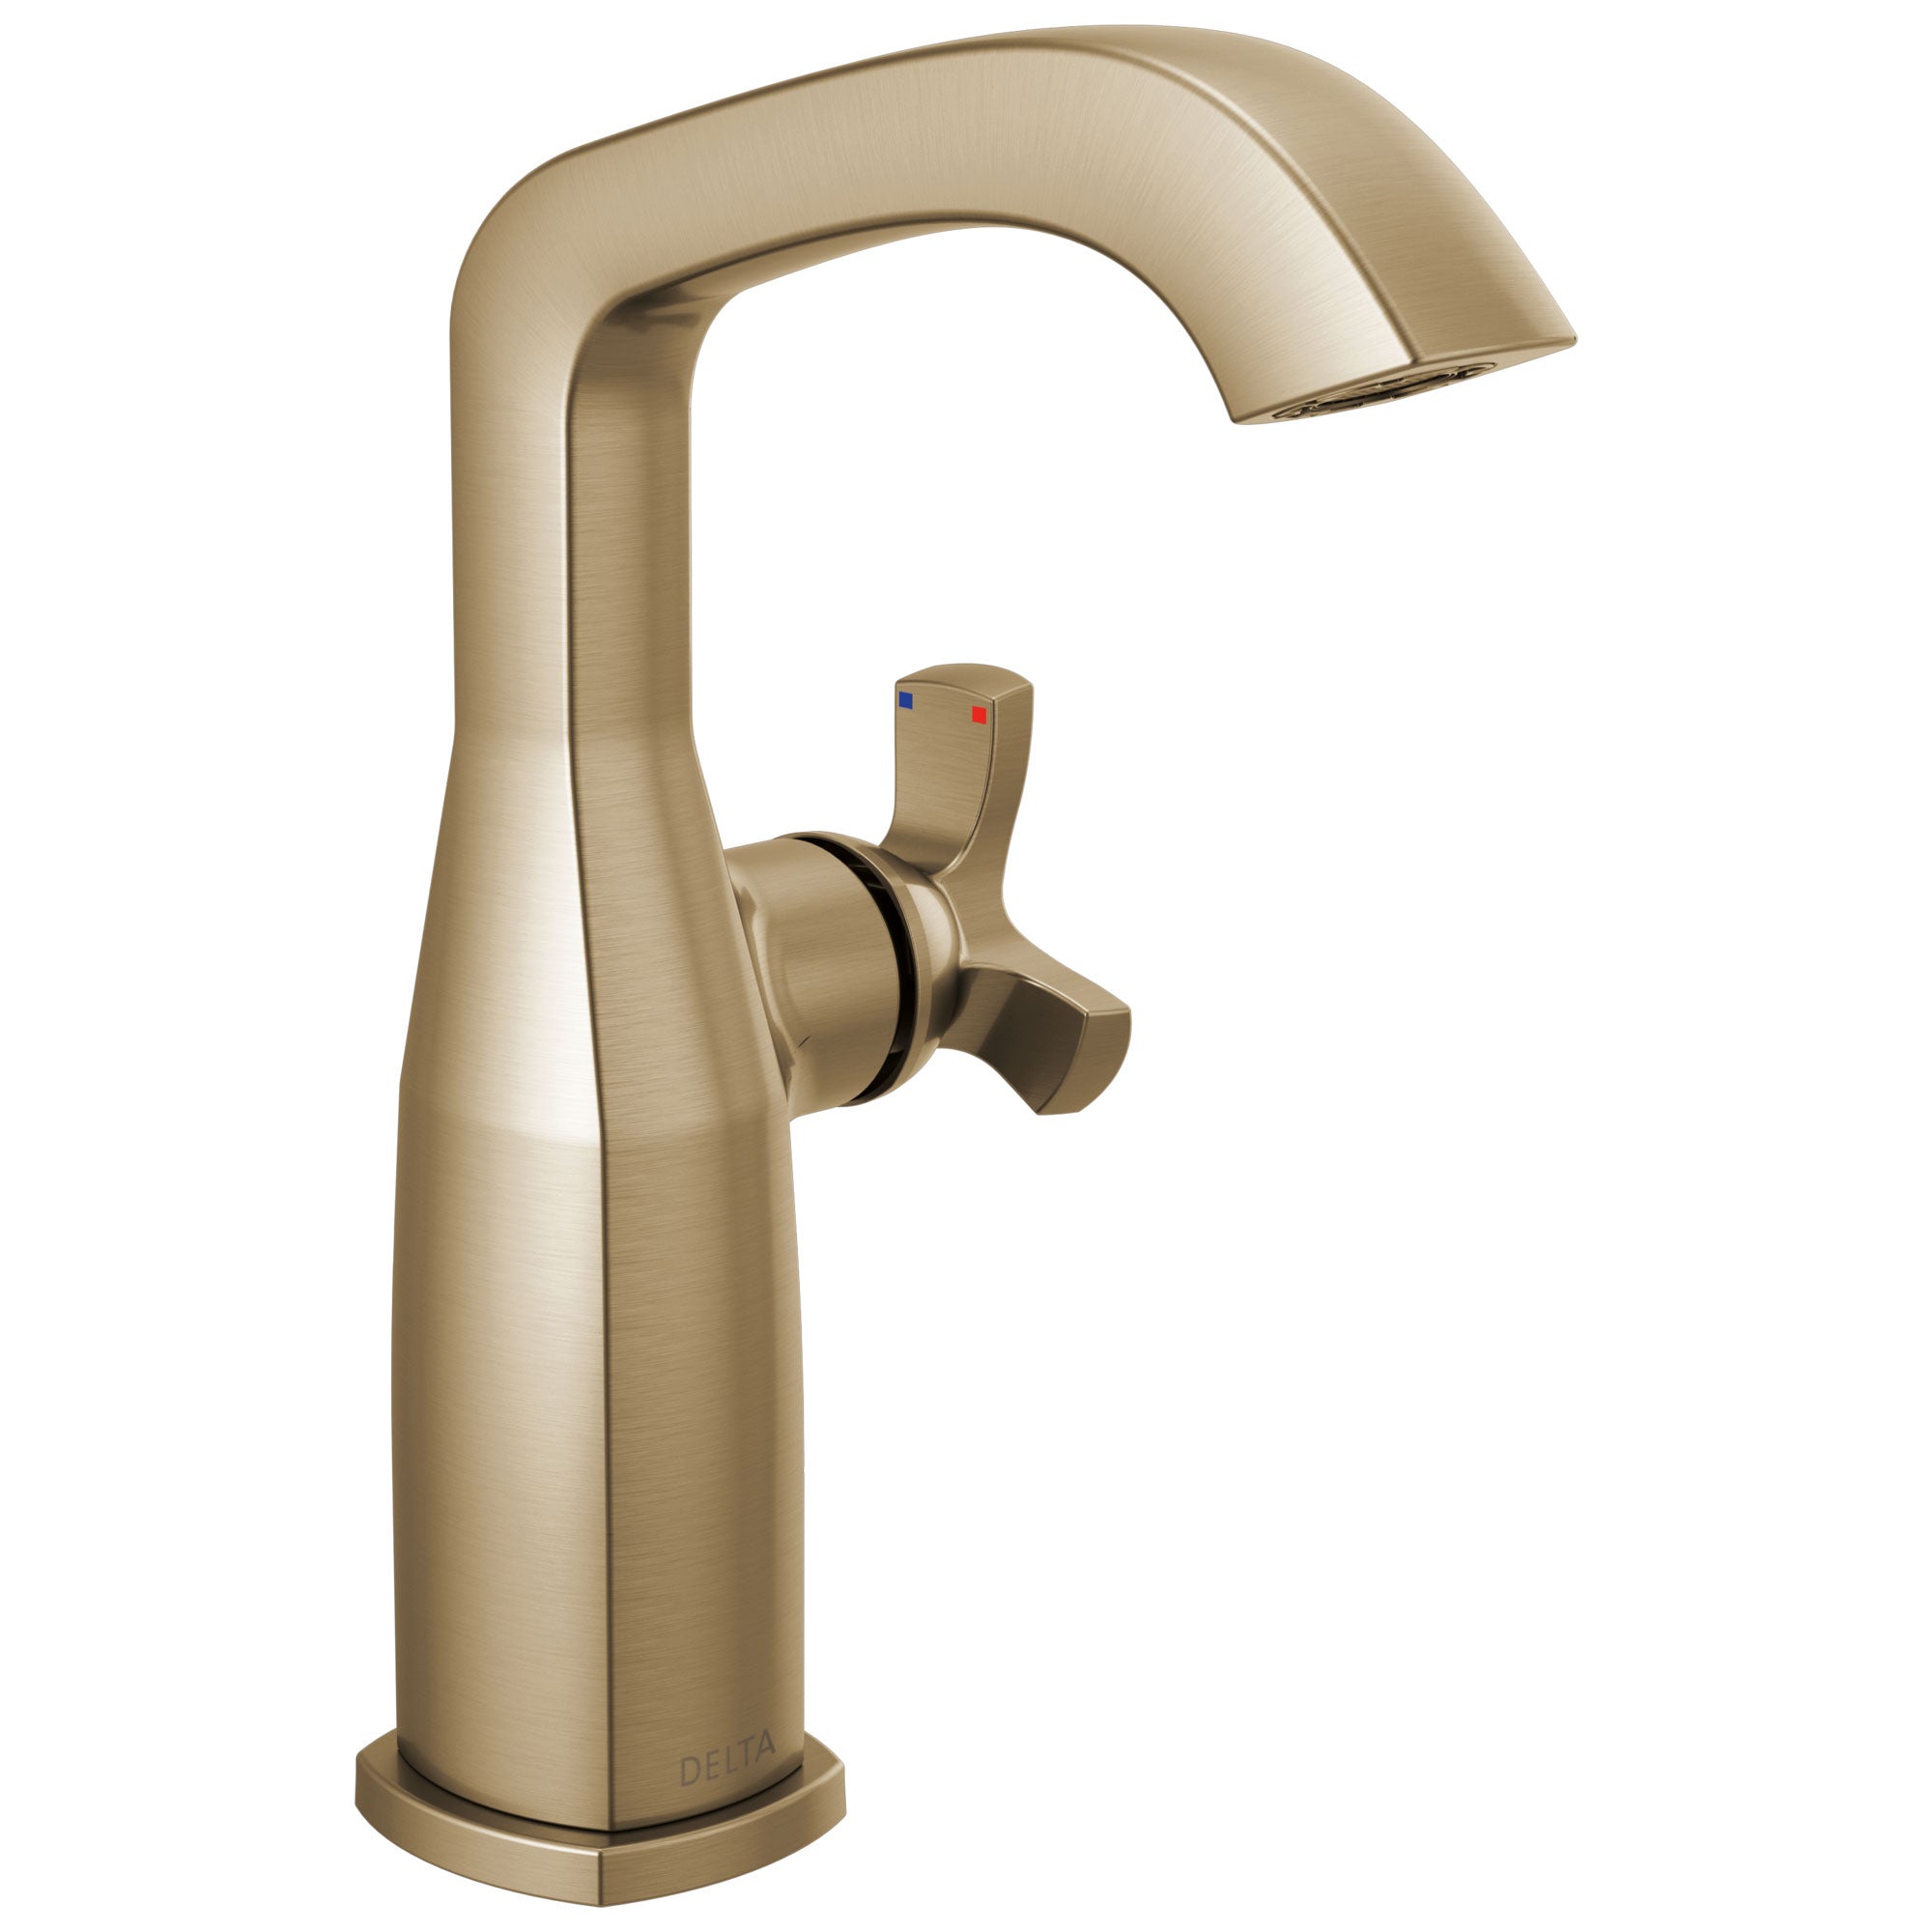 Delta Stryke Champagne Bronze Finish Mid-Height Spout Single Hole Bathroom Sink Faucet Includes Helo Cross Handle D3594V